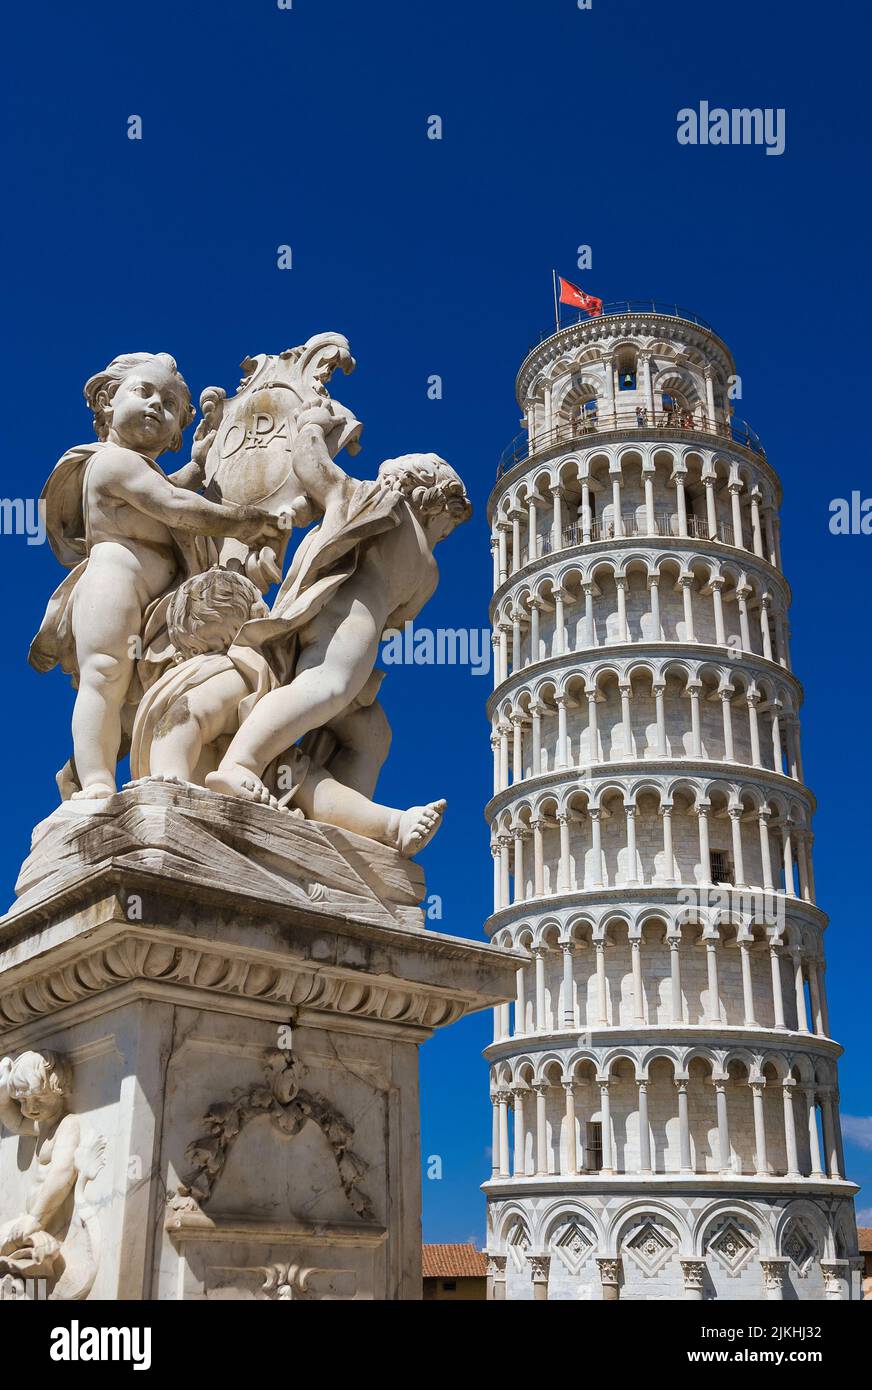 Fontana dei Putti (Fountain with Angels), erected in 1765 in front of the famous Leaning Tower of Pisa Stock Photo